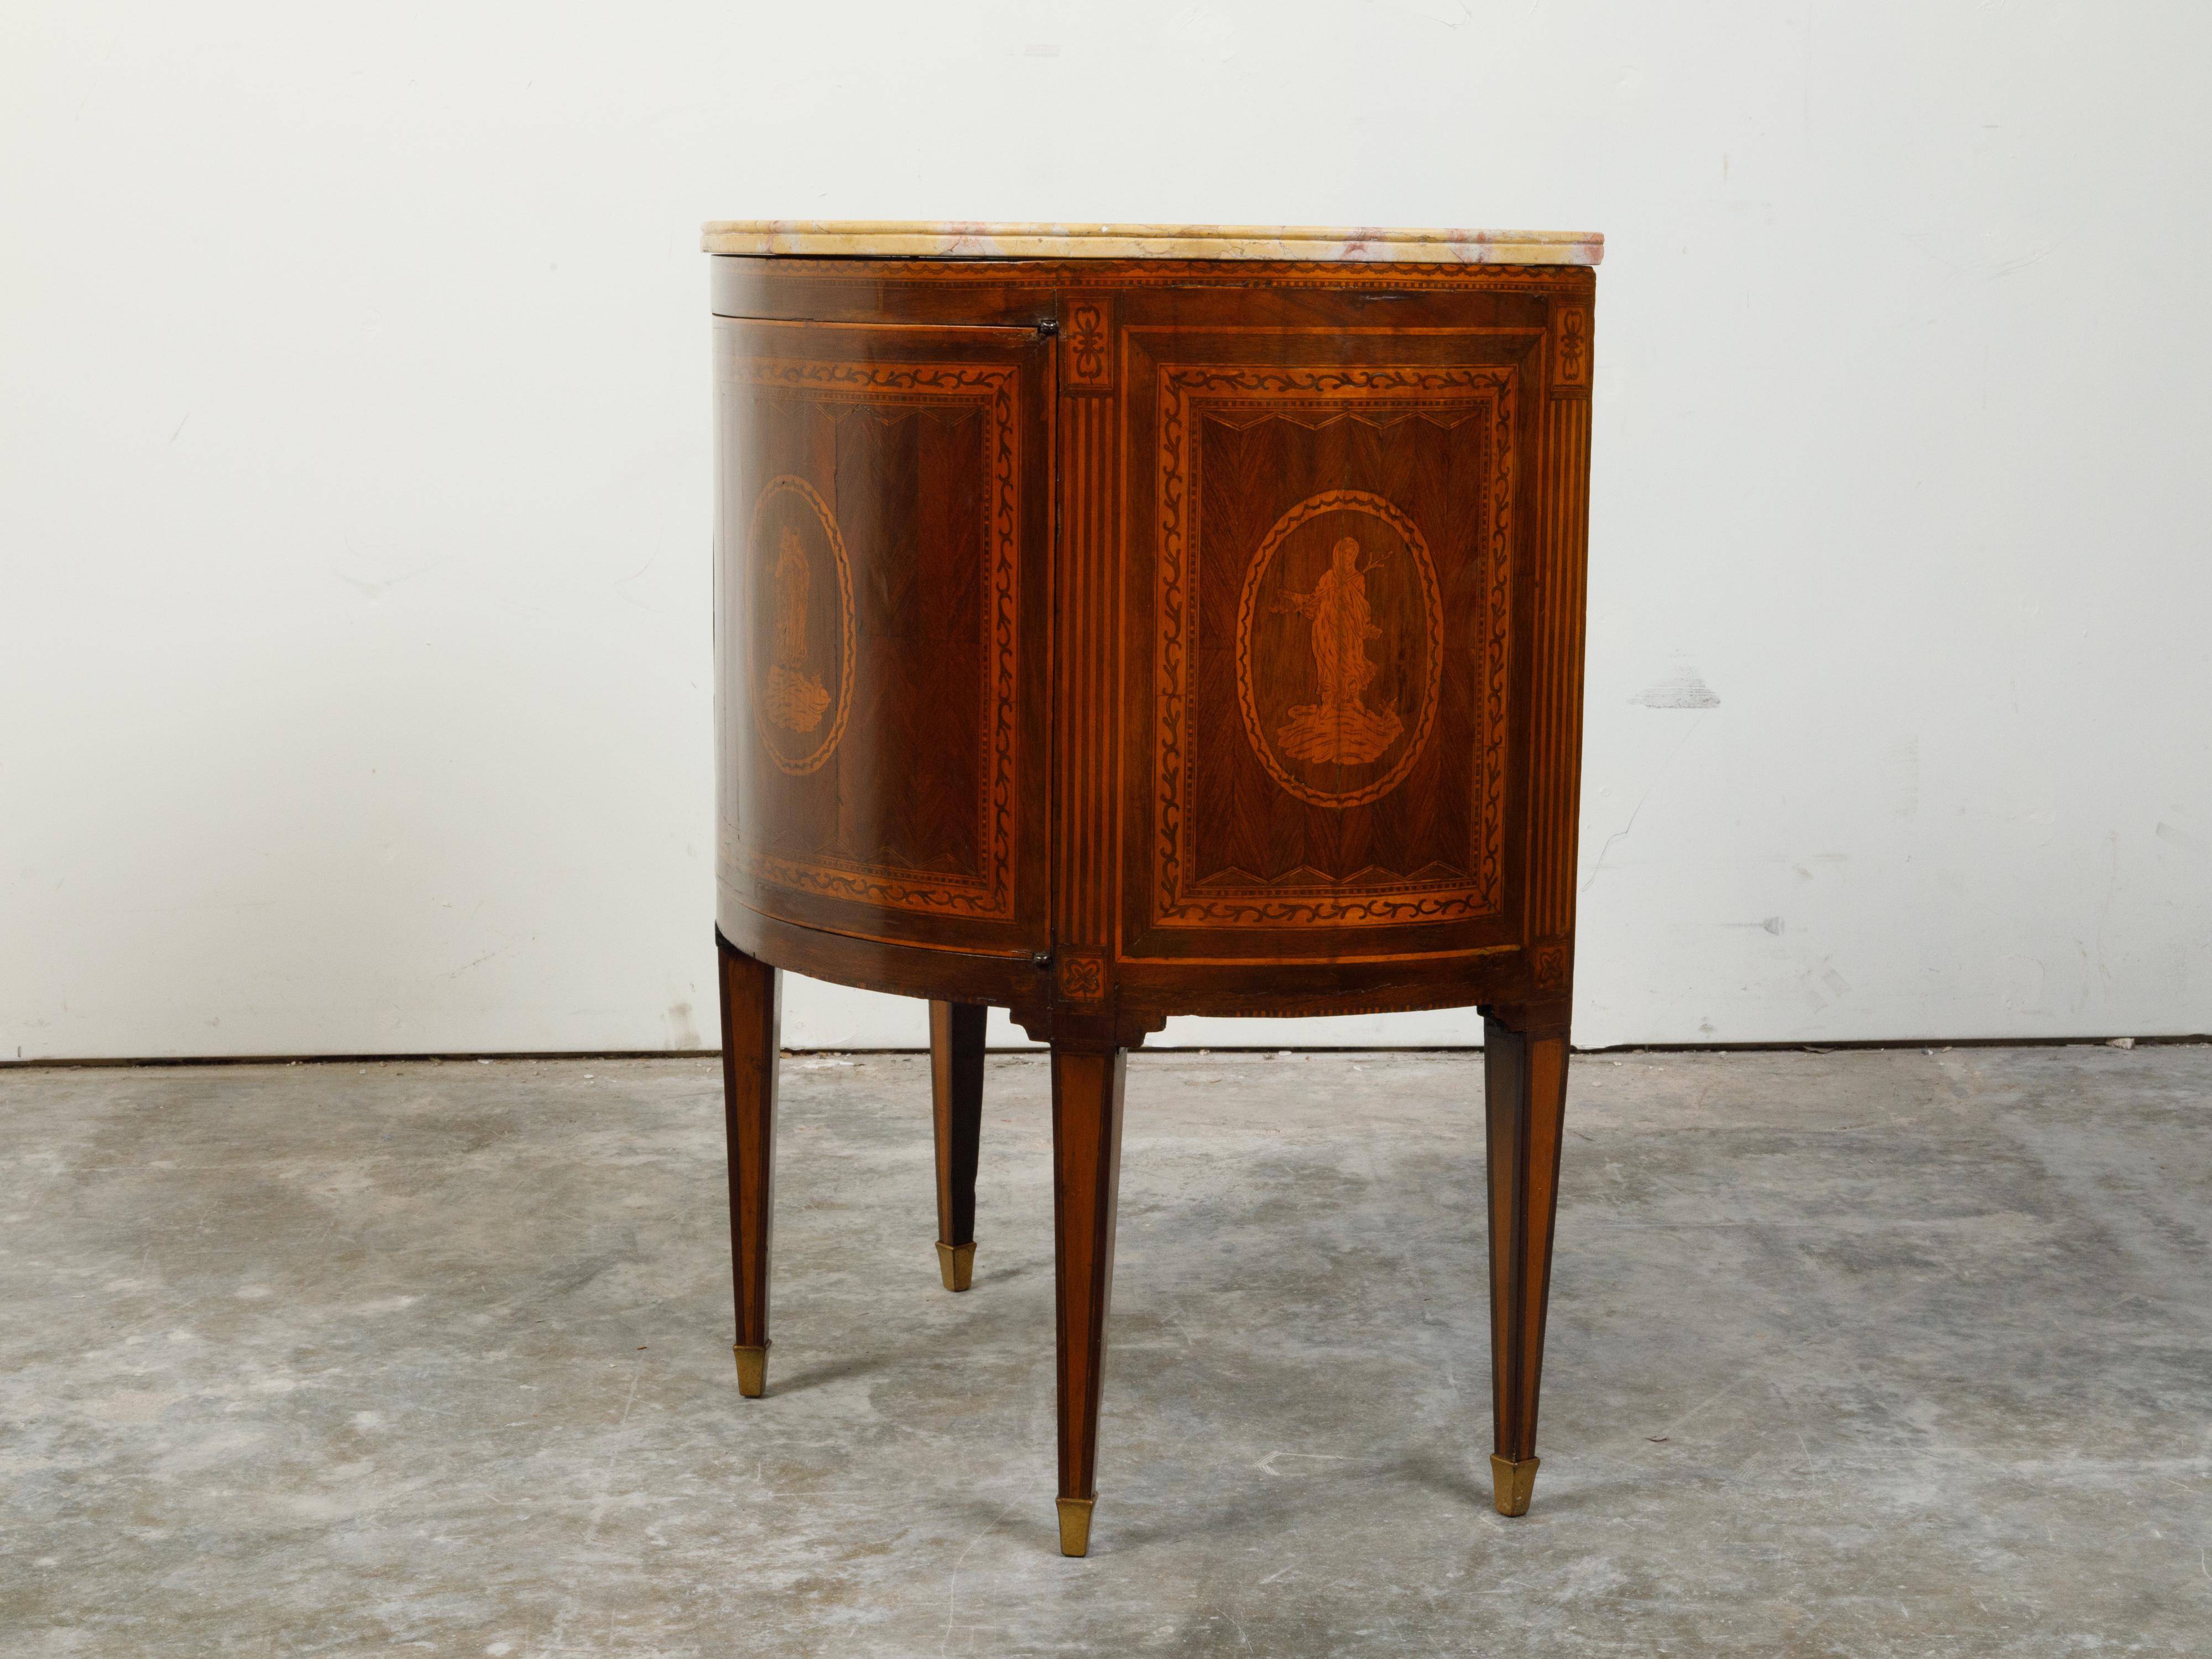 Italian Neoclassical 18th Century Walnut Demilune Cabinet with Marquetry Décor For Sale 3